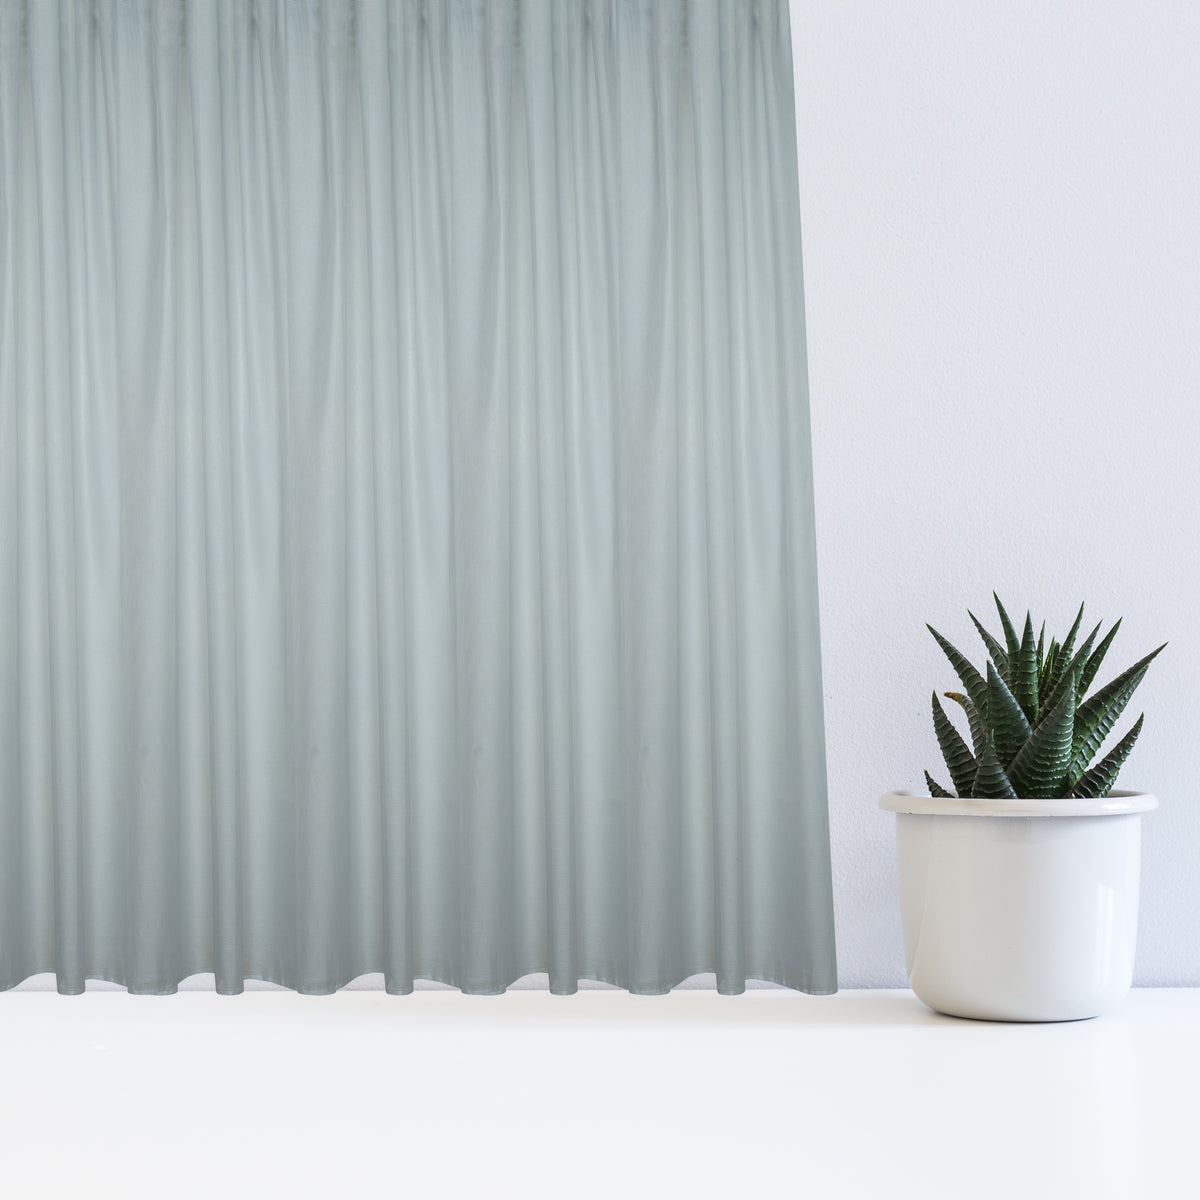 Day curtain delicate gray mesh